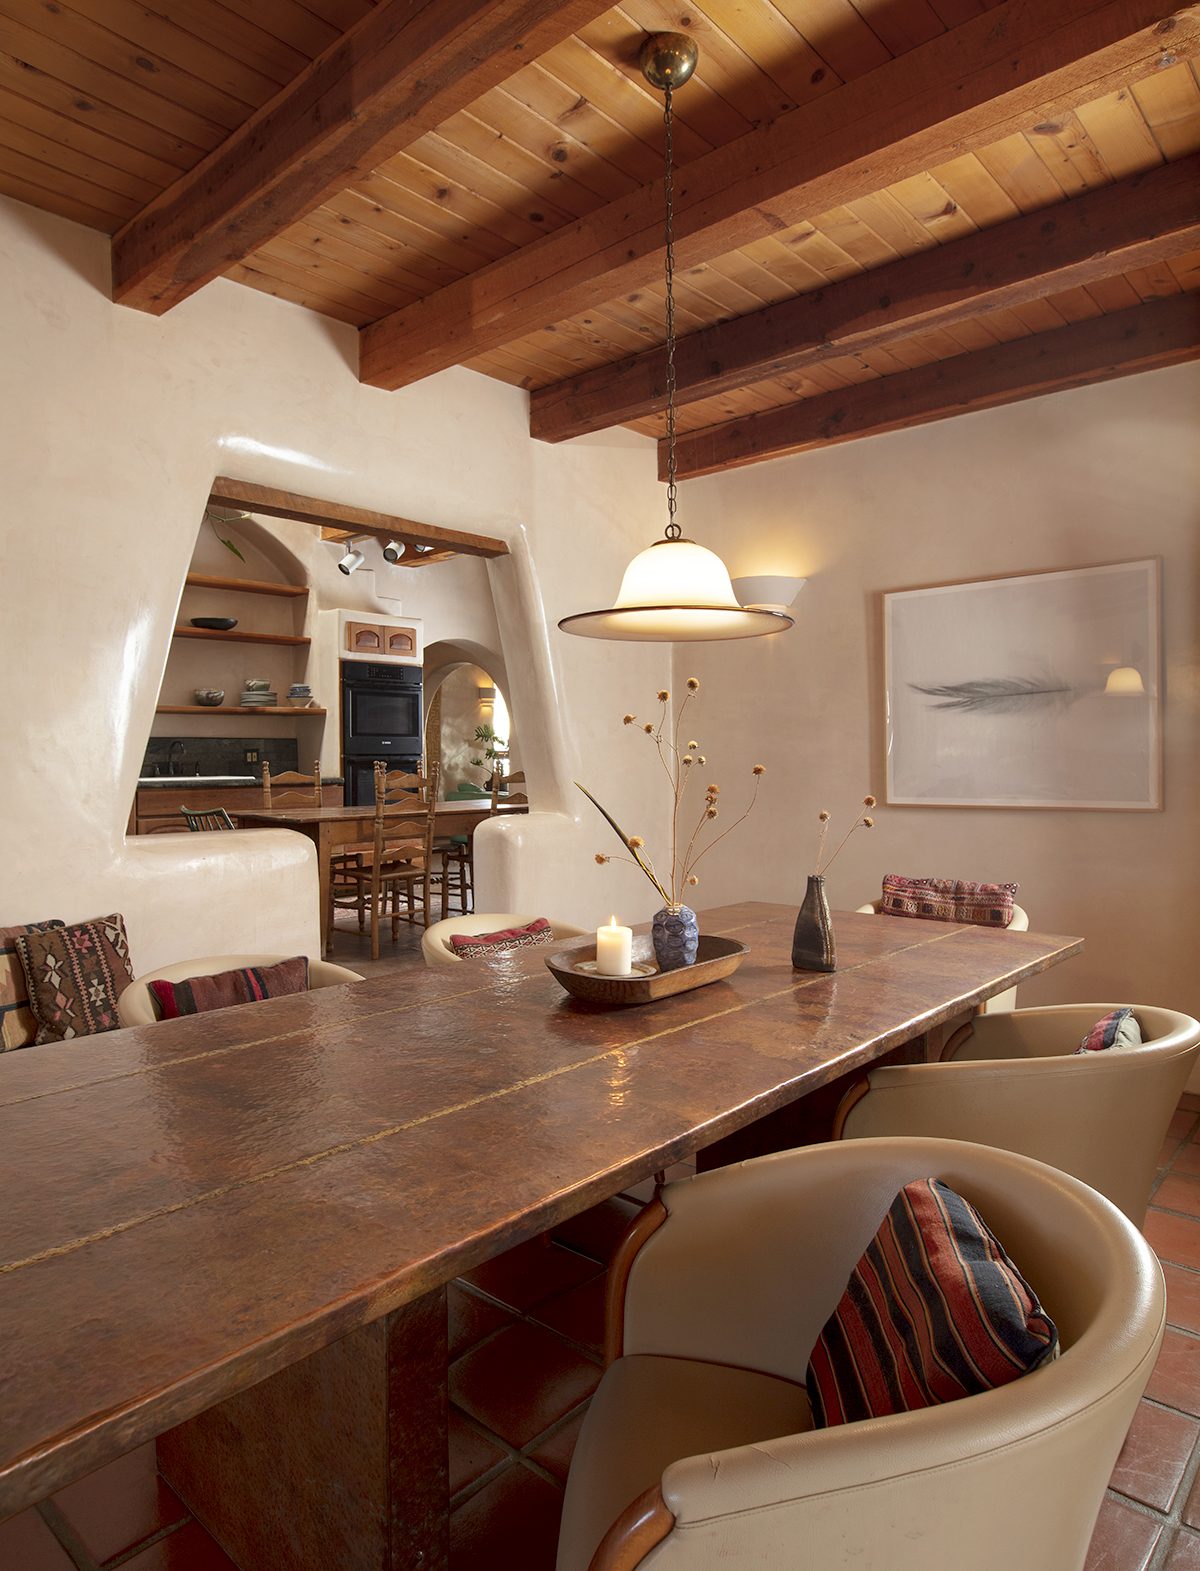 Raquel Allegra's house in Taos, New Mexico for the Wall Street Journal